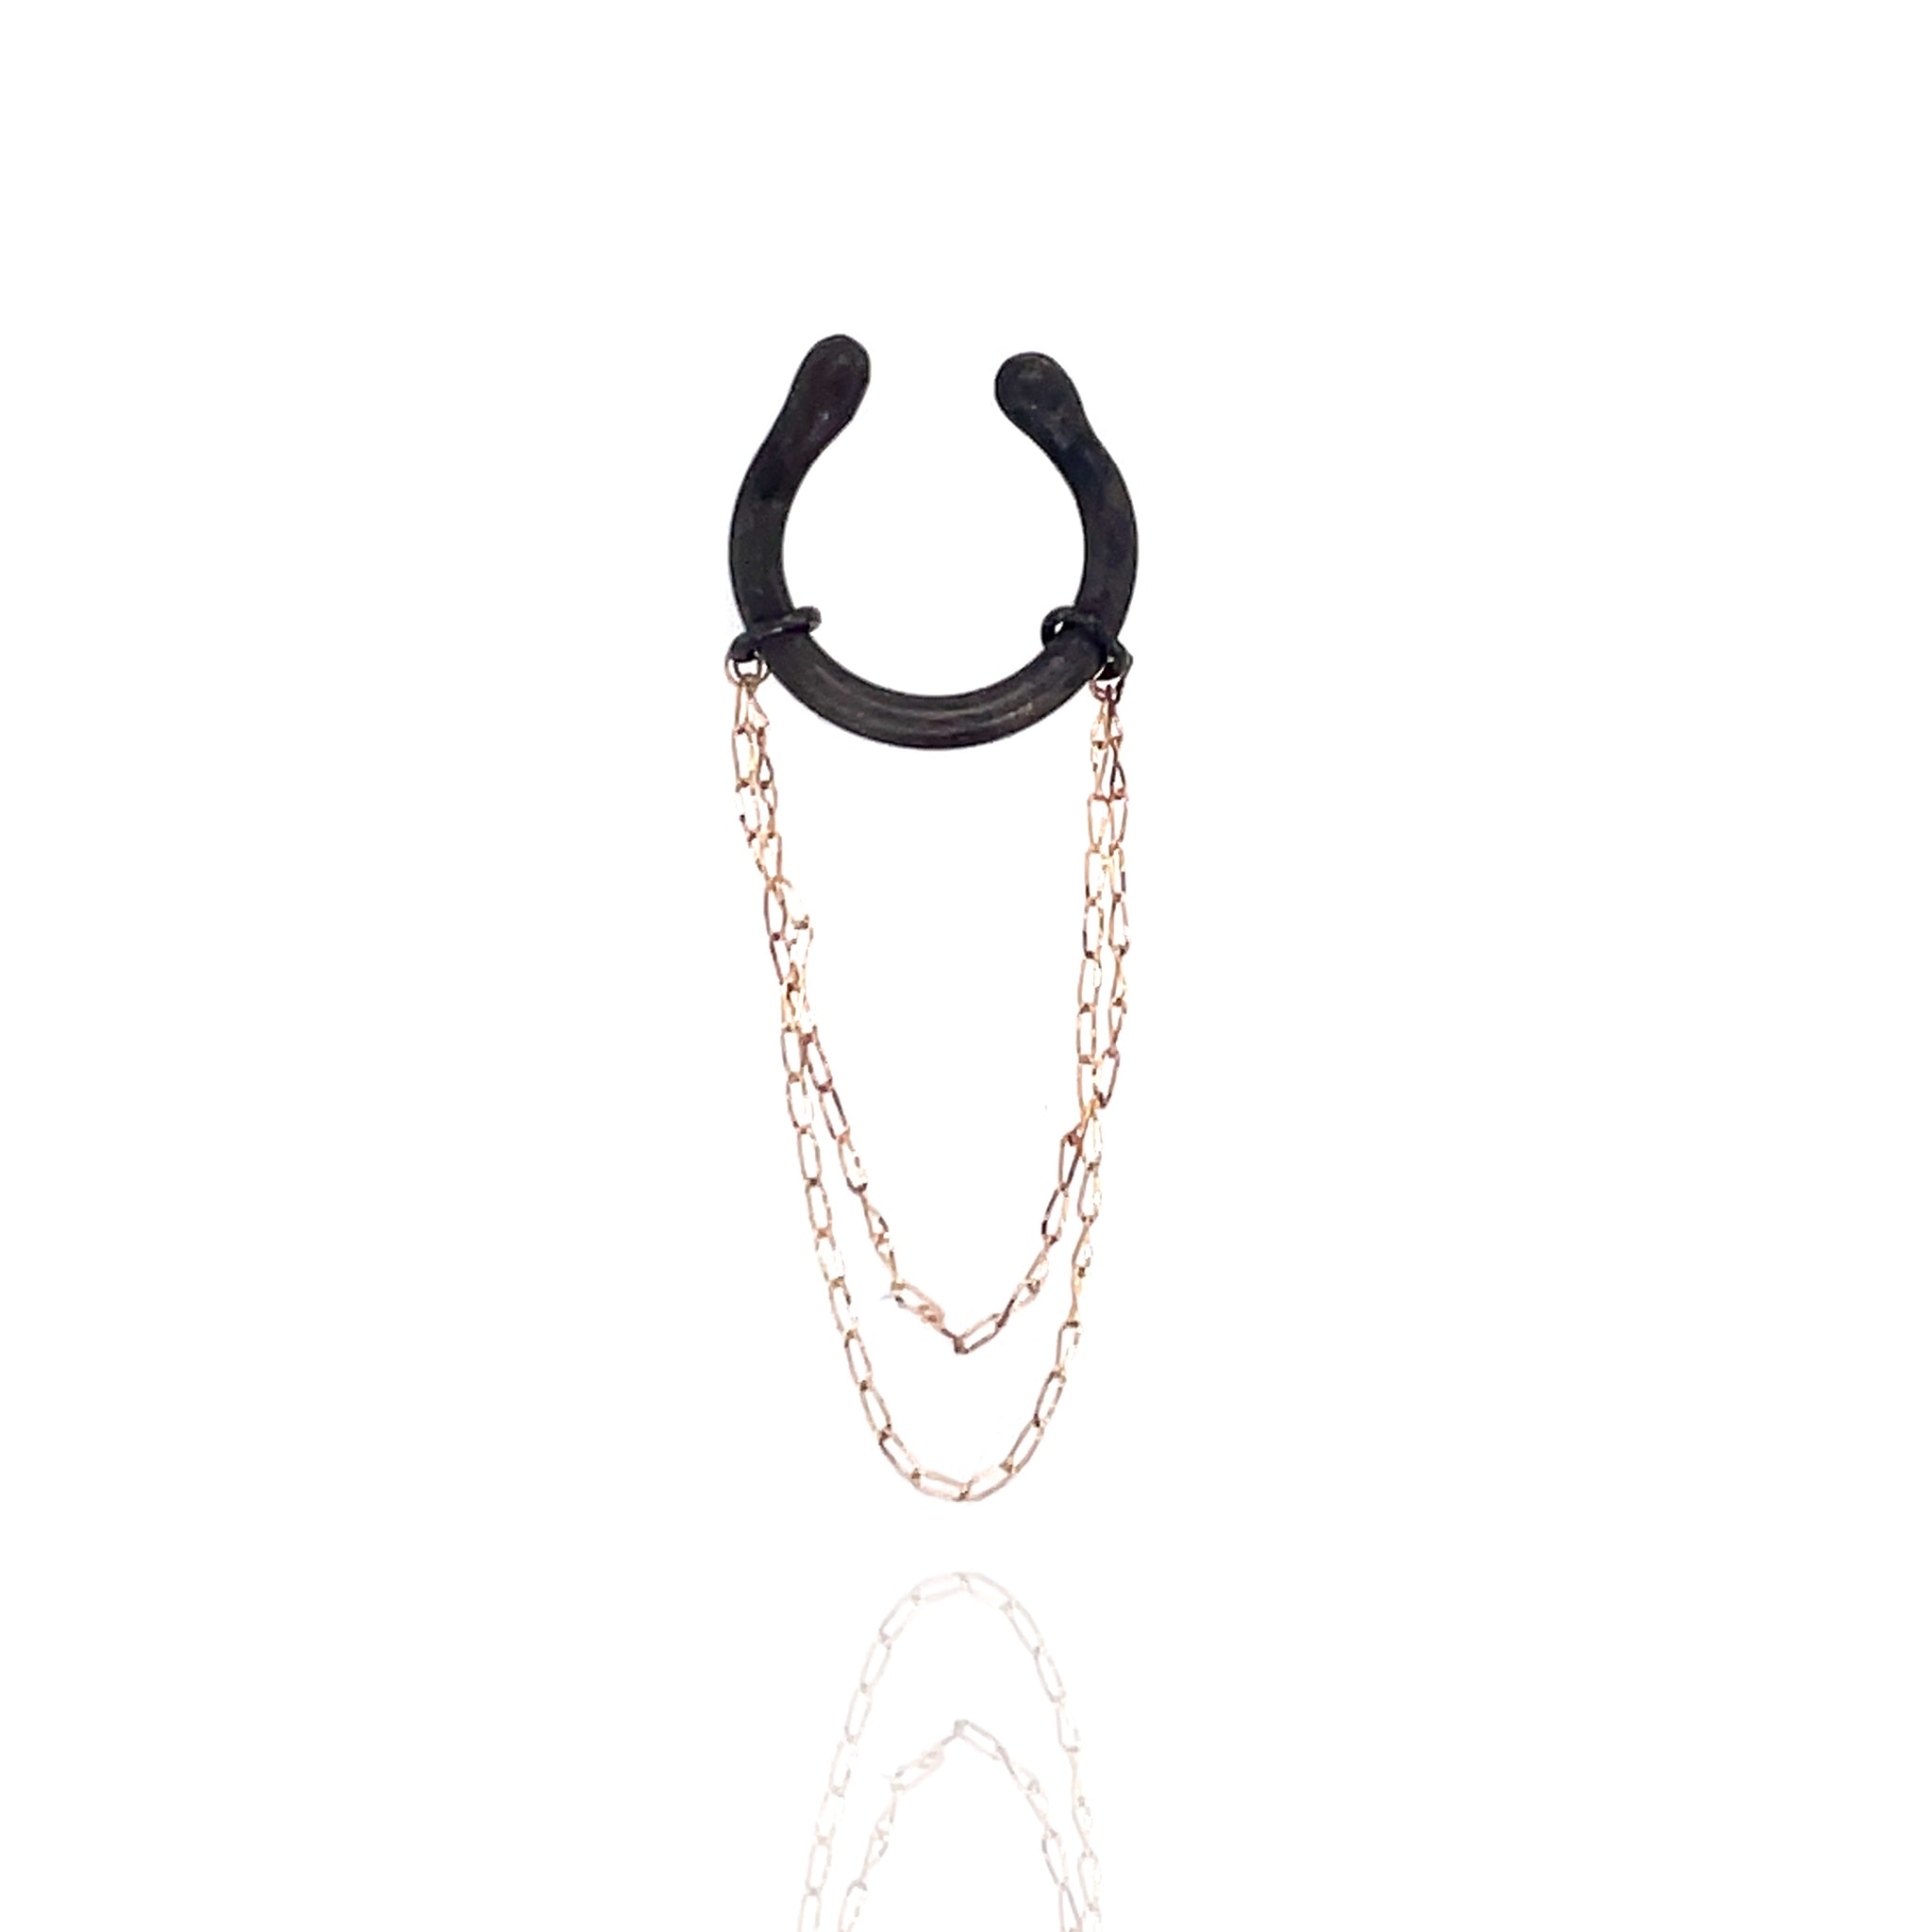 Double Chain Ear Cuff in Black Silver and Gold